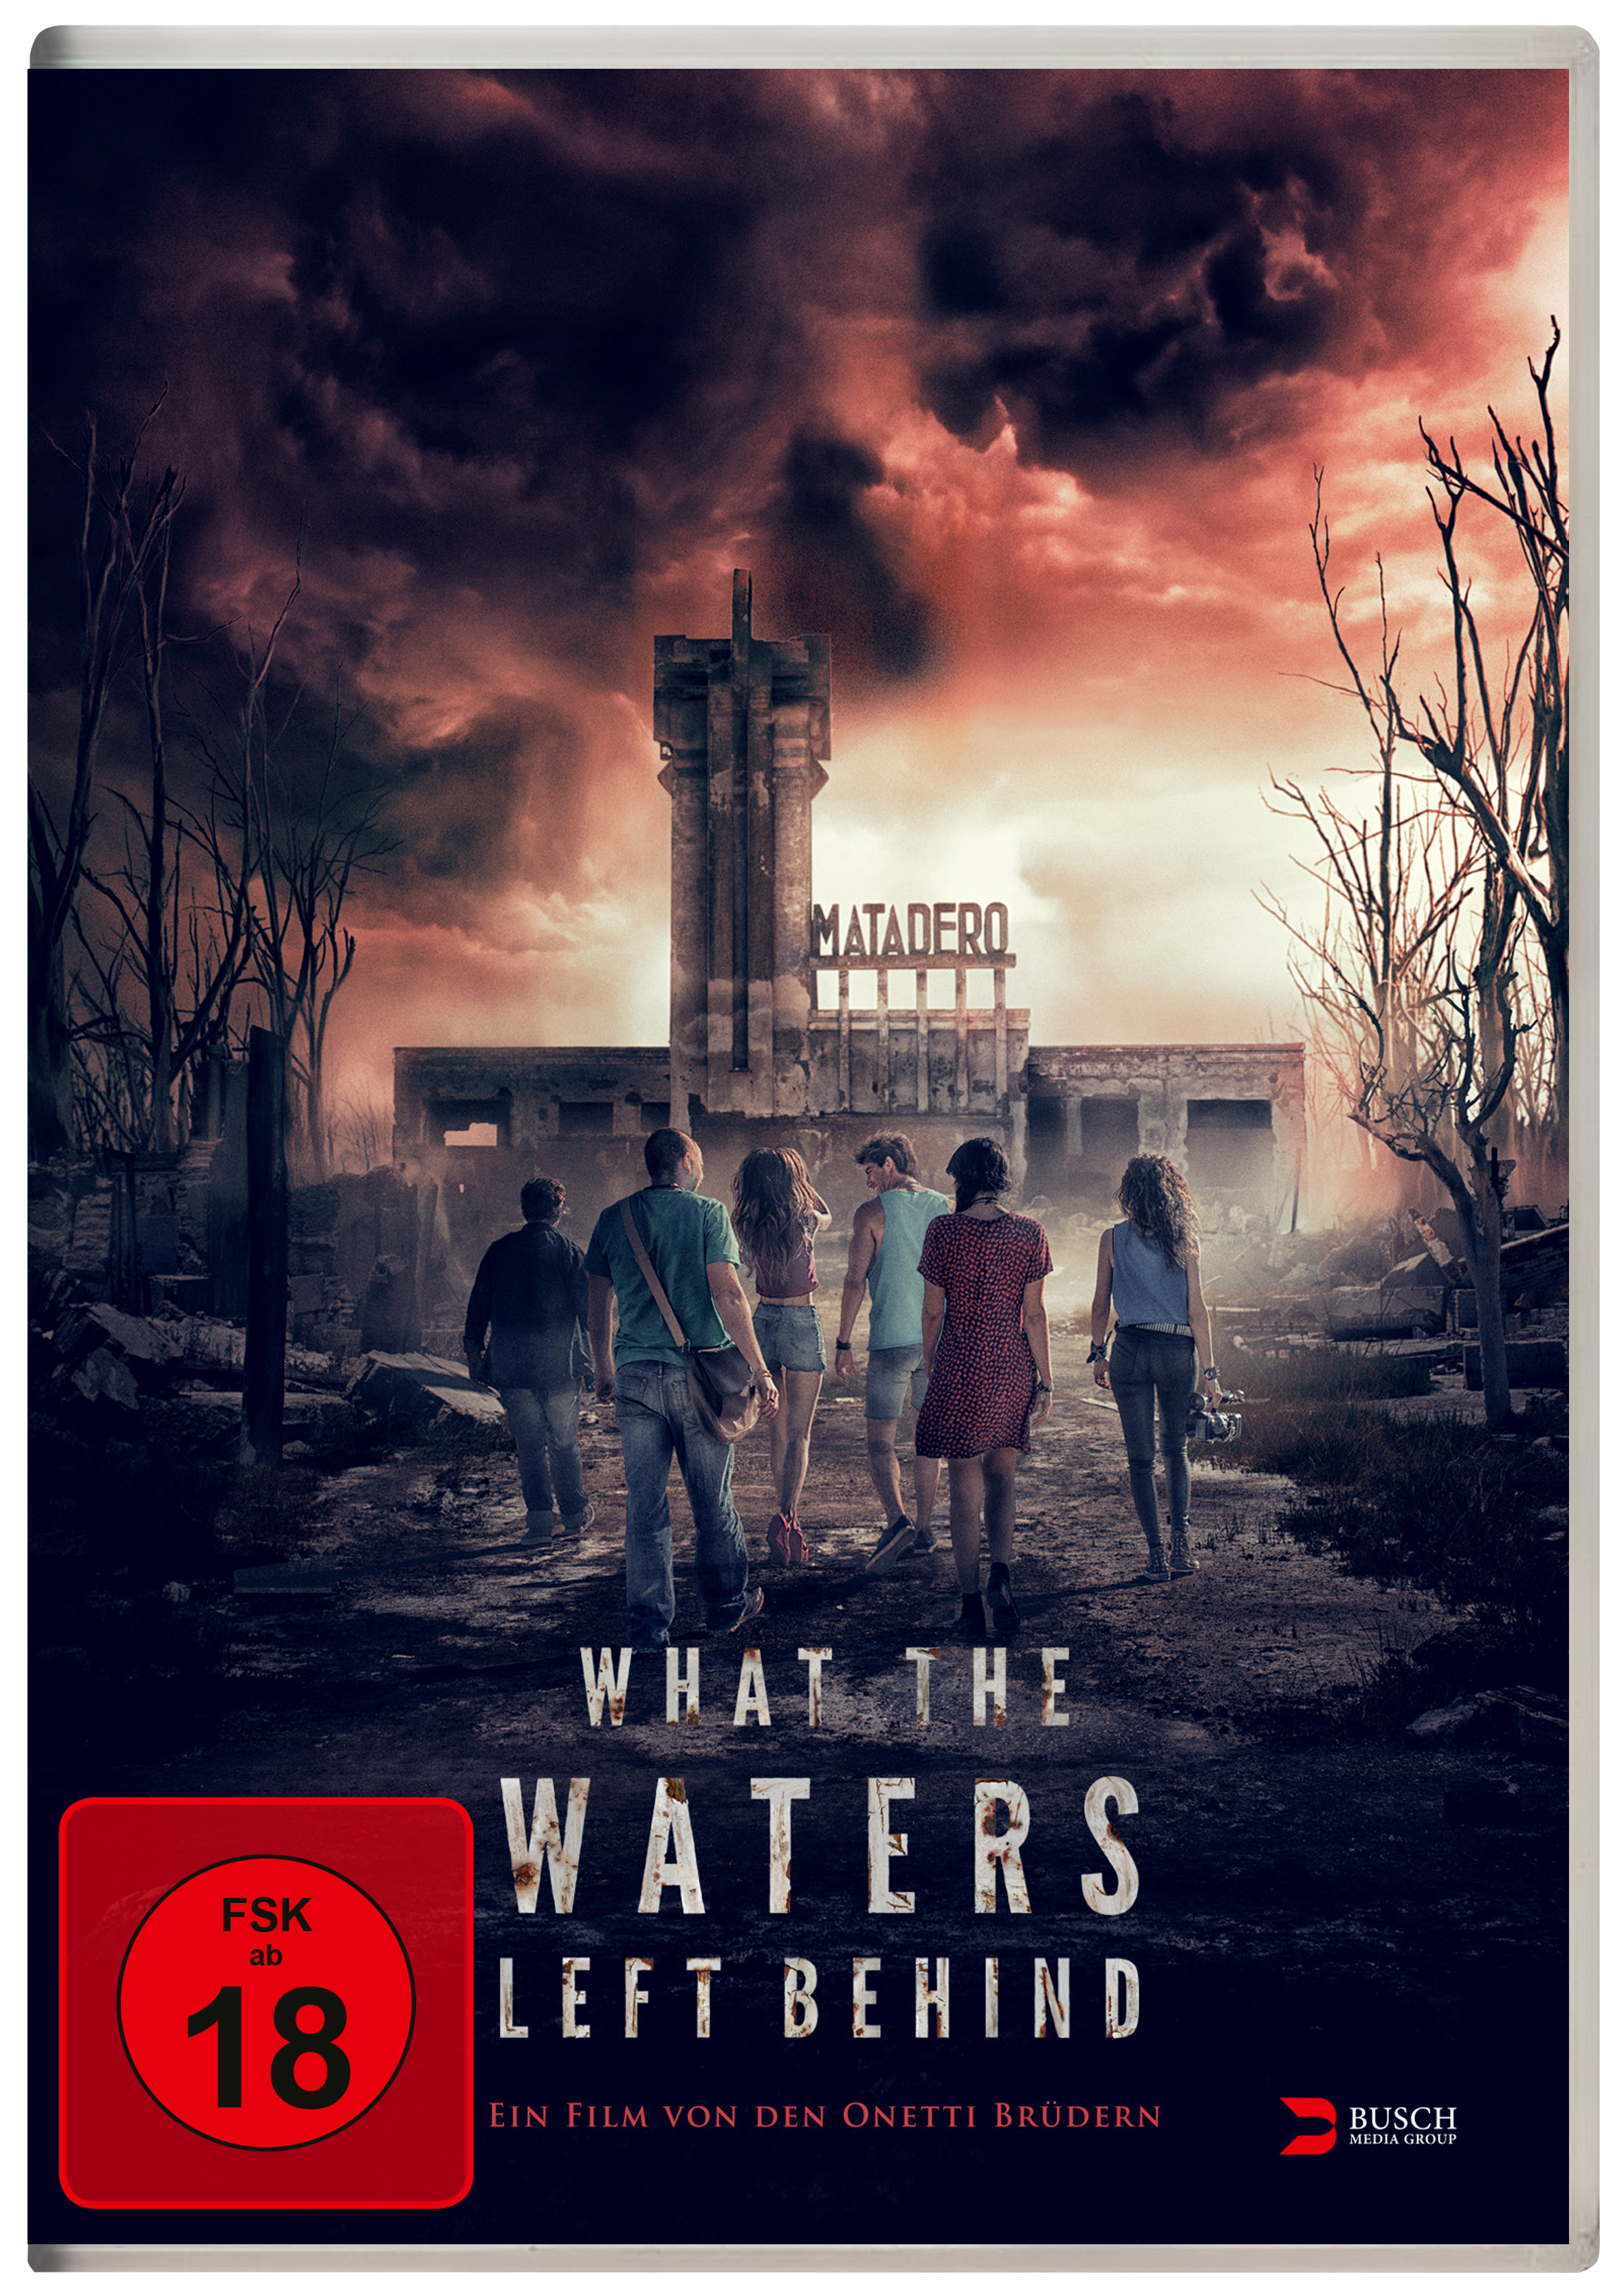 What the Waters DVD Behind Left